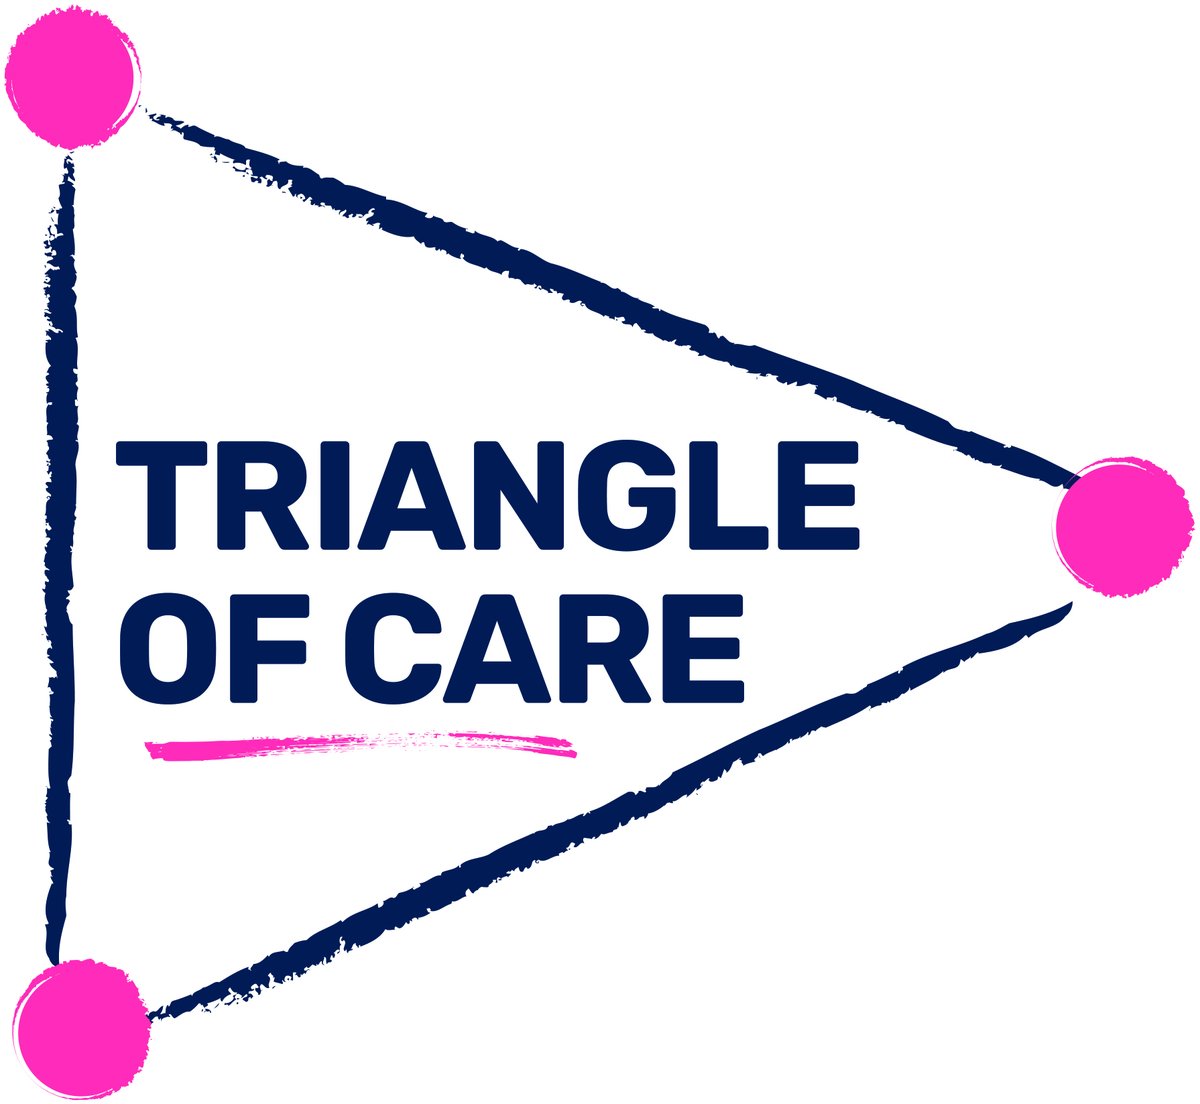 We're proud to share that we are now working towards the @CarersTrust's ‘Triangle of Care’ accreditation scheme - and we are the very first non-NHS mental health provider to do so! Visit our website to find out more!